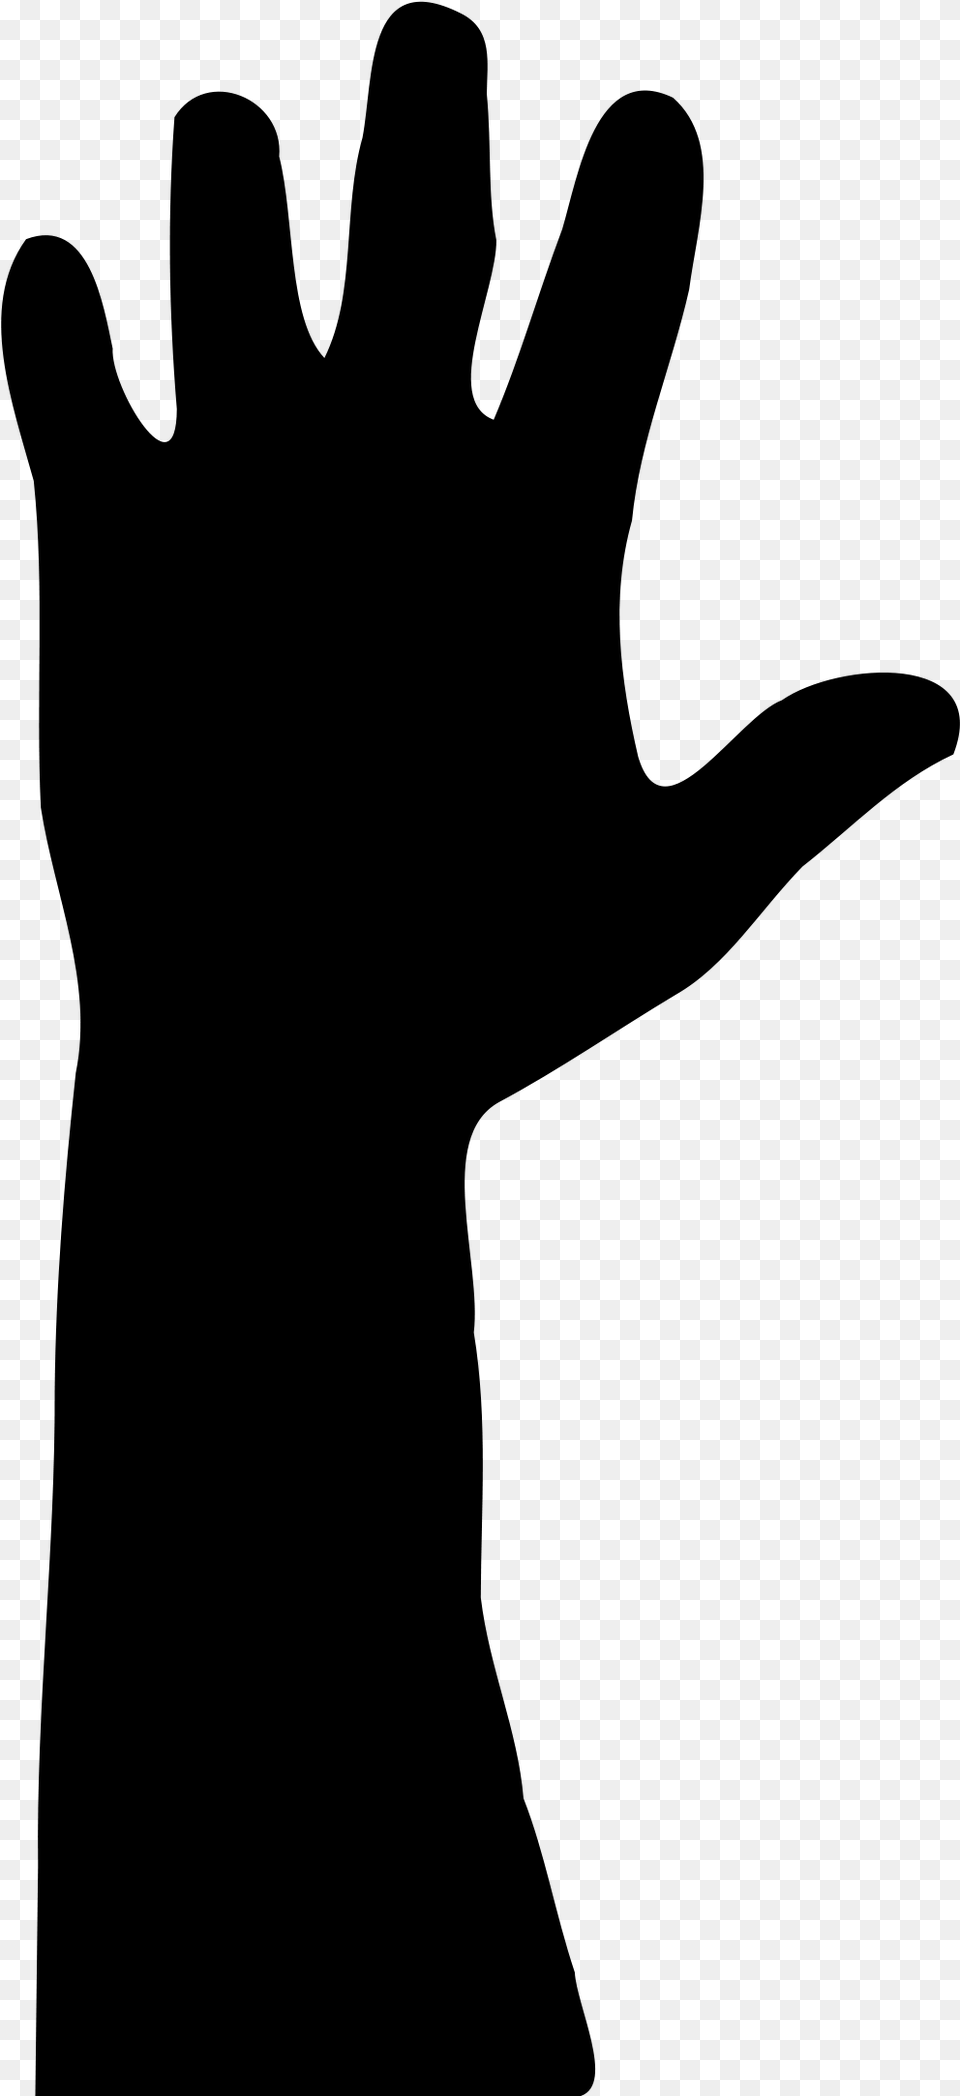 Hand Reaching Up Silhouette, Gray Free Transparent Png